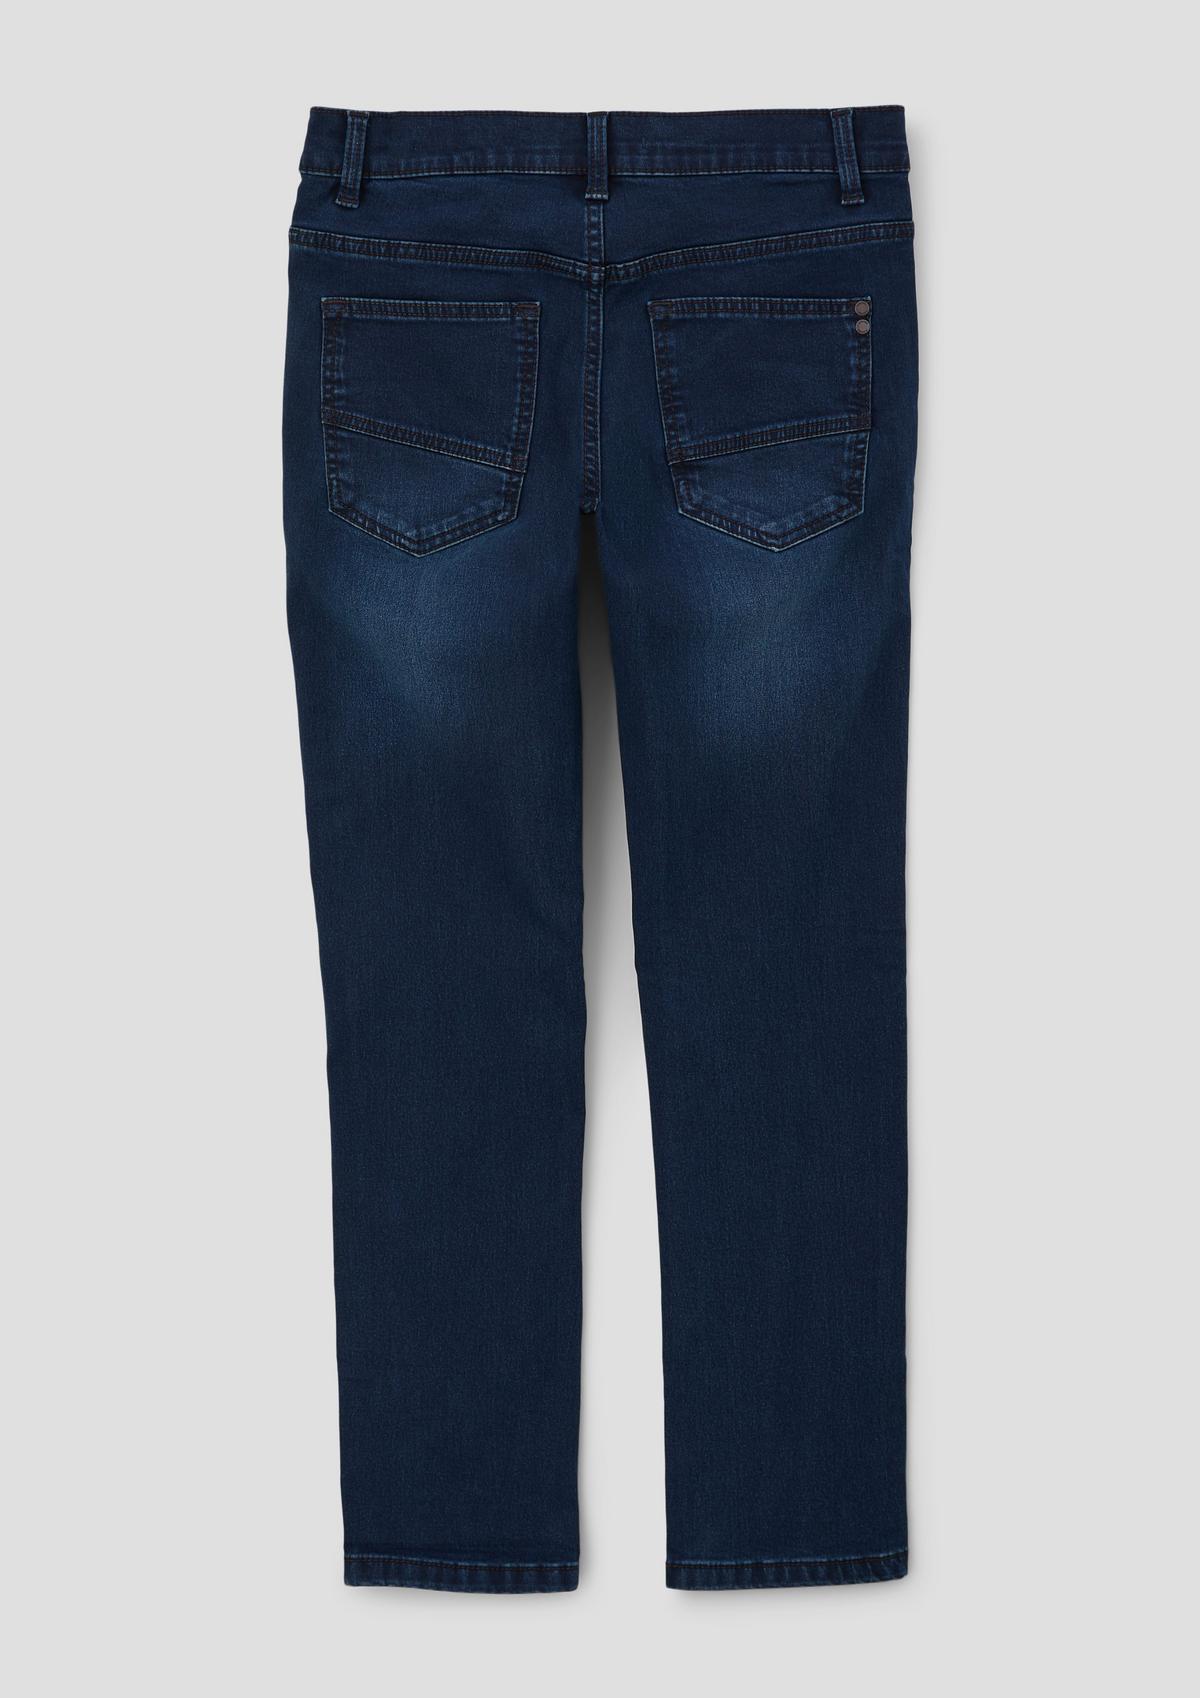 s.Oliver Jeans Seattle / regular fit / mid rise / straight leg